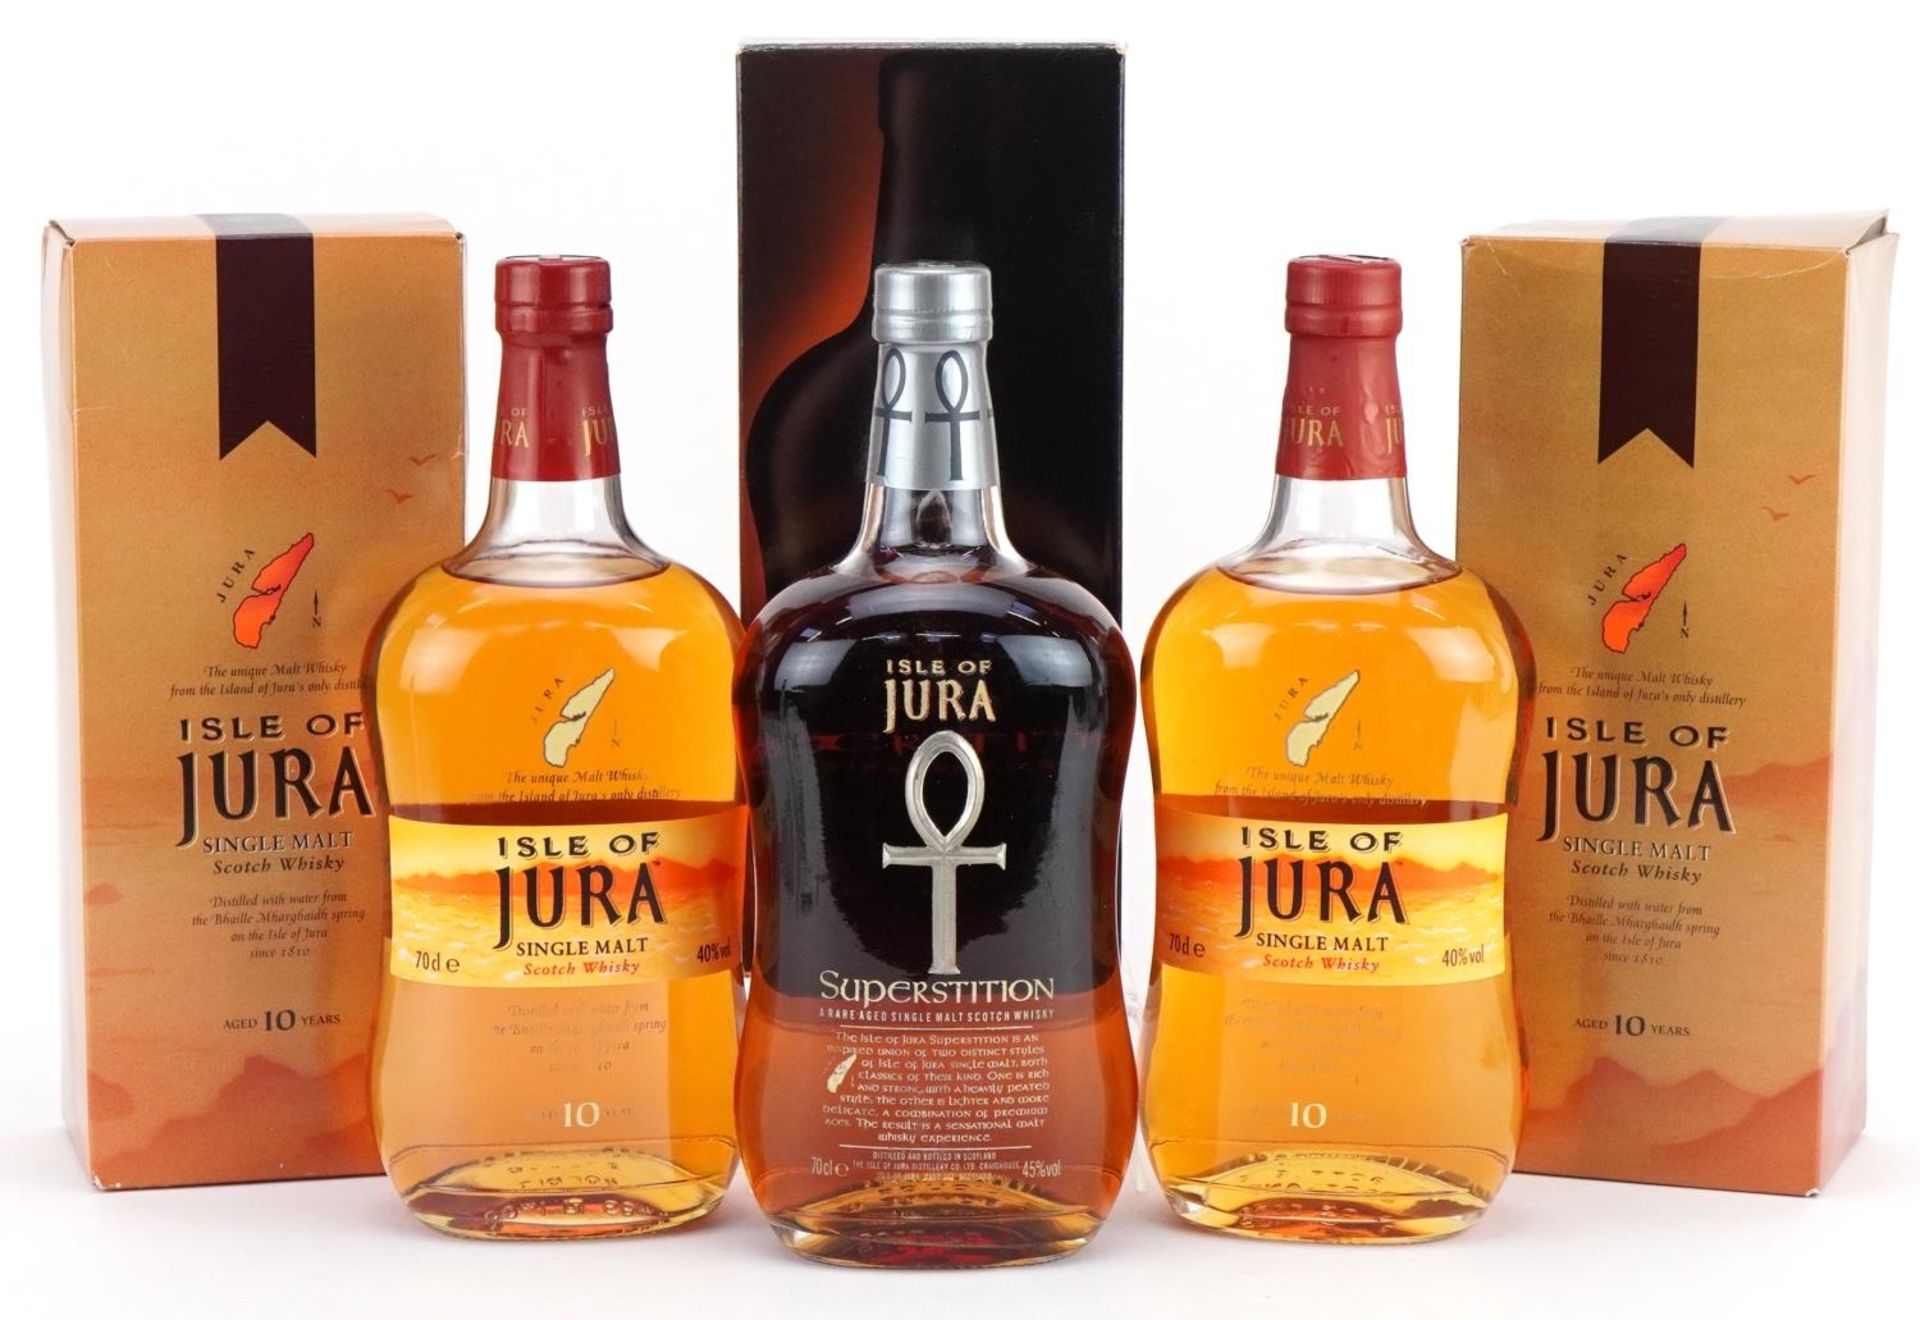 Three bottles of Iles of Jura whisky with boxes comprising two bottles aged 10 years and Rare Aged